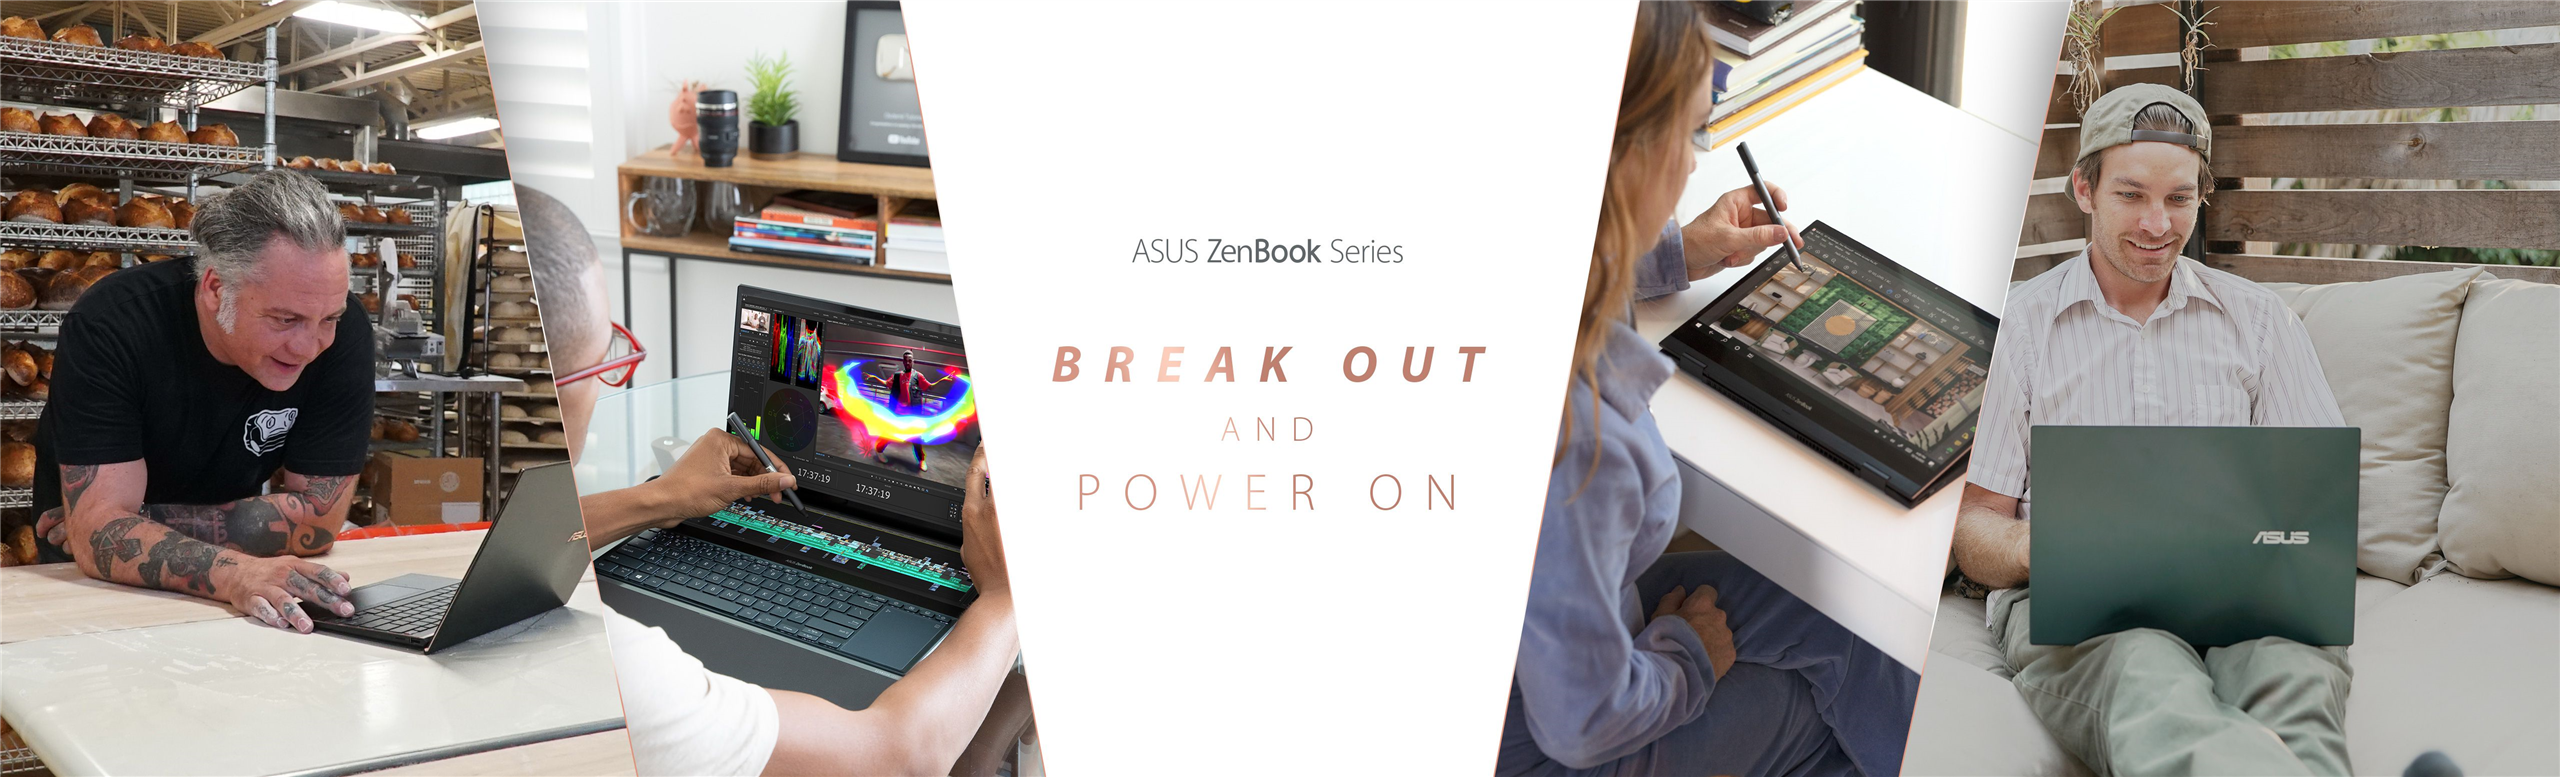 The picture on the left is a man editing a video on Zenbook Pro Dou 15 OLED, the right side is a woman drawing on a converted Zenbook laptop. In the middle of the banner shows the words "break out and power on".